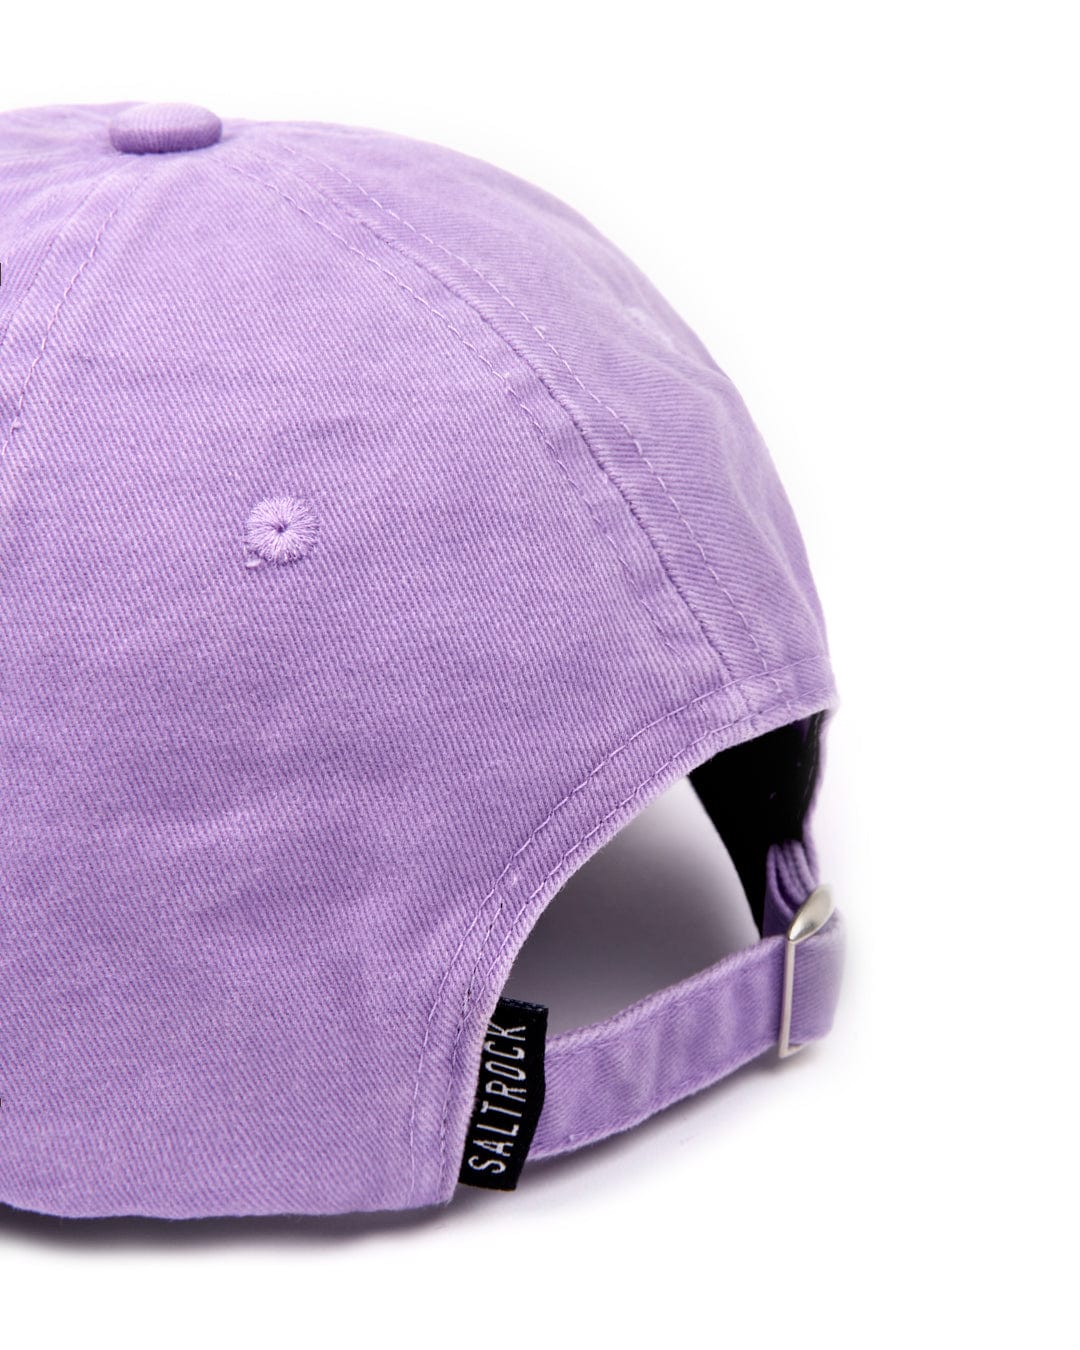 SR Original Cap by Saltrock in Purple, isolated on a white background.